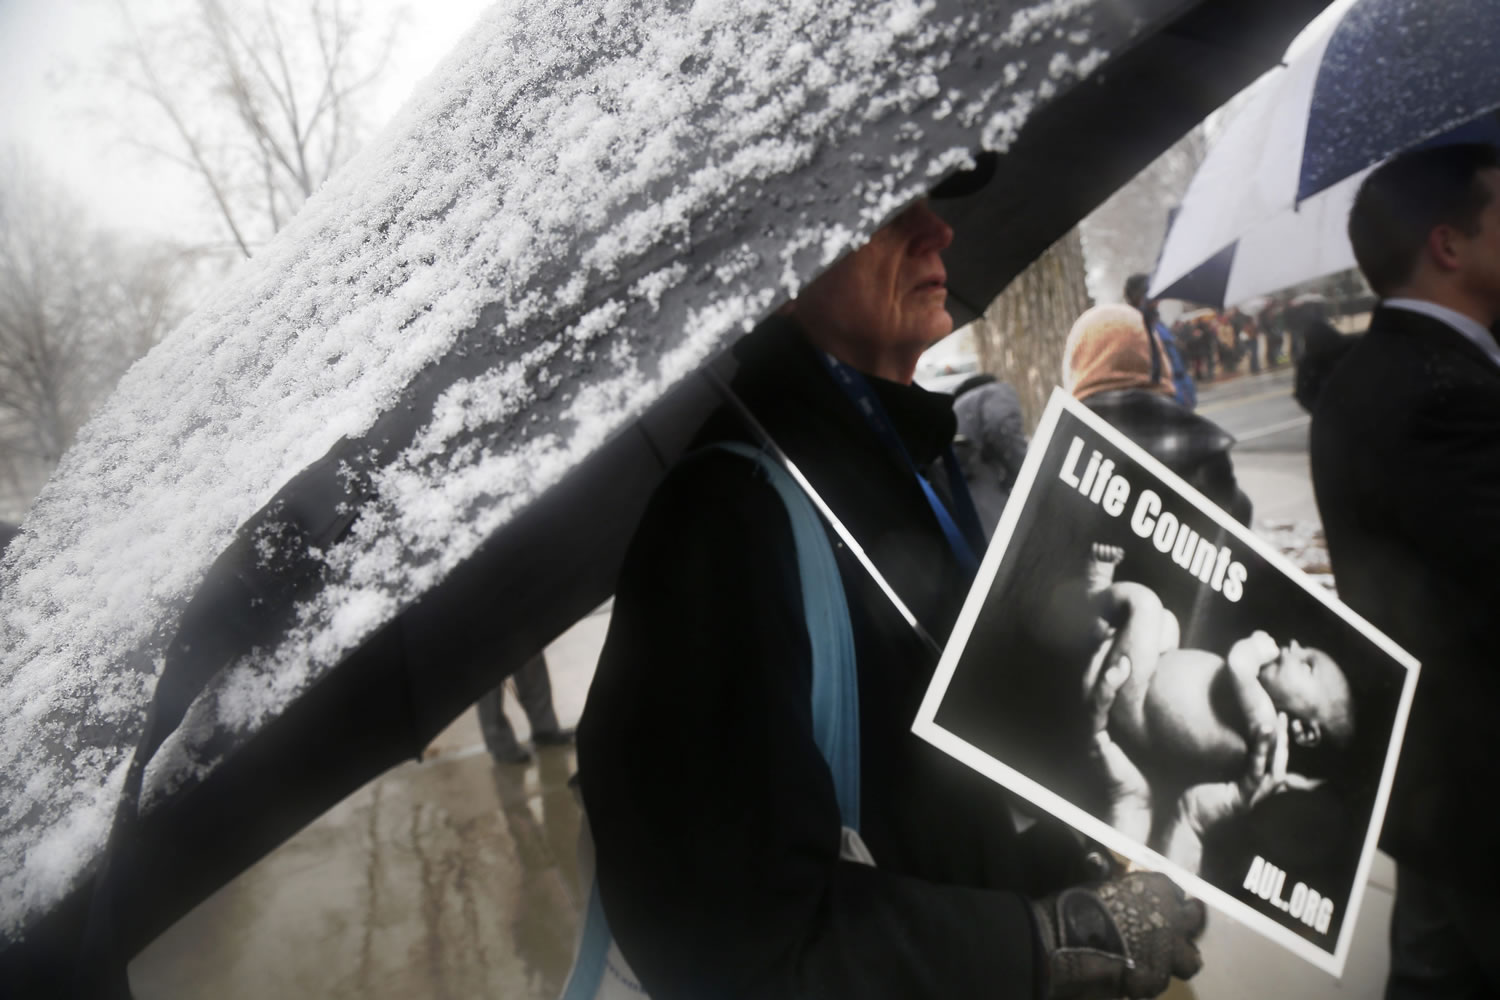 A protester stands as it snows during a demonstration in front of the Supreme Court in Washington on Tuesday.